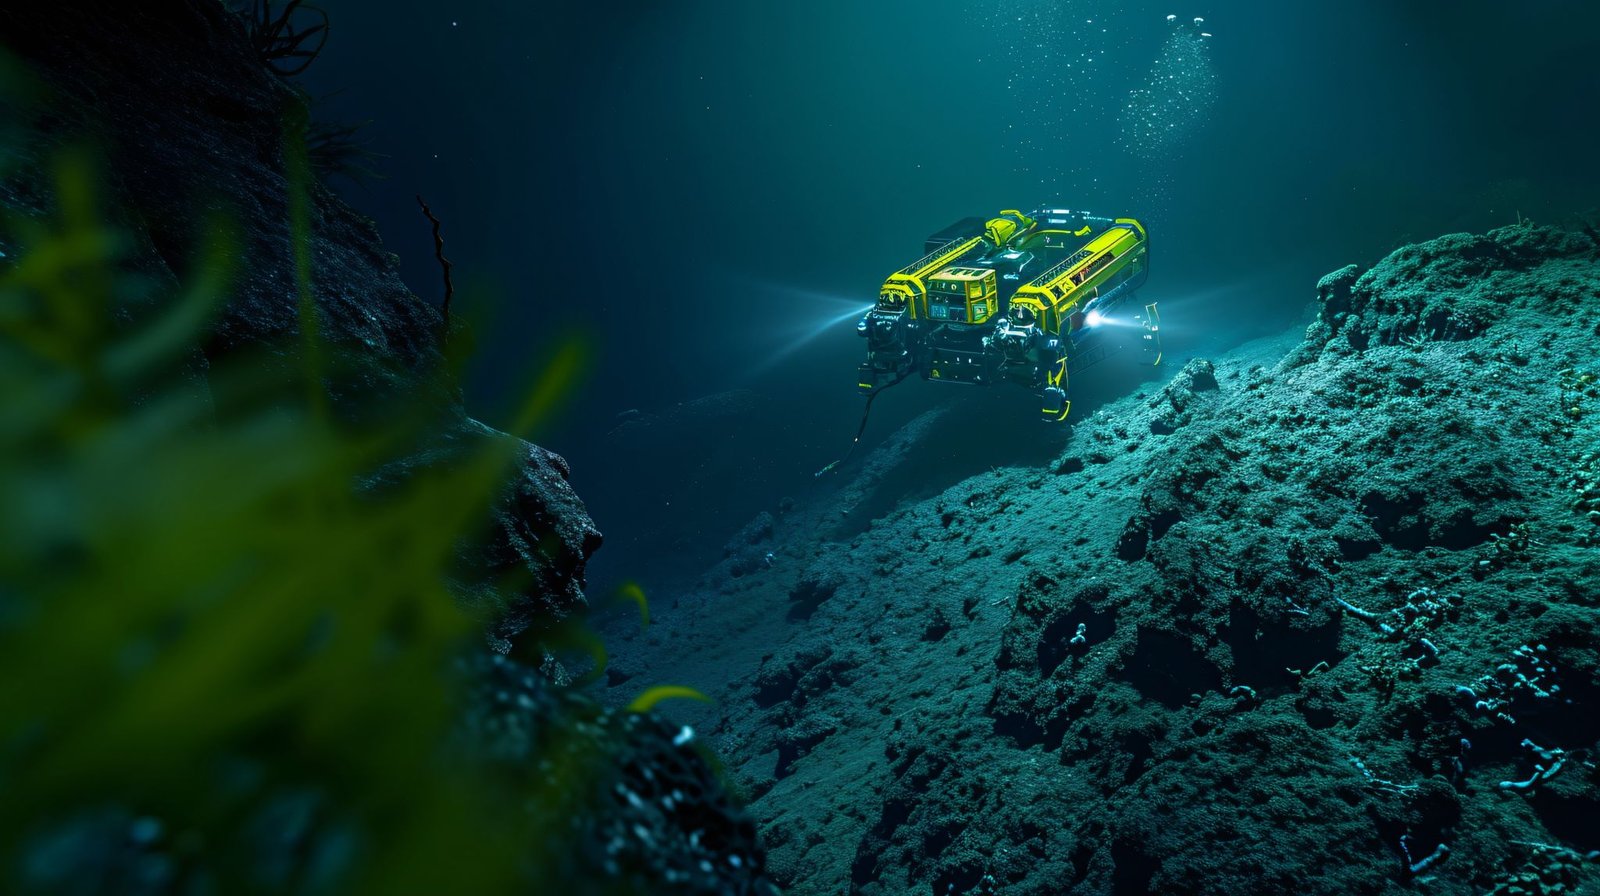 Subsea services across Europe, Africa, and SouthEast Asia